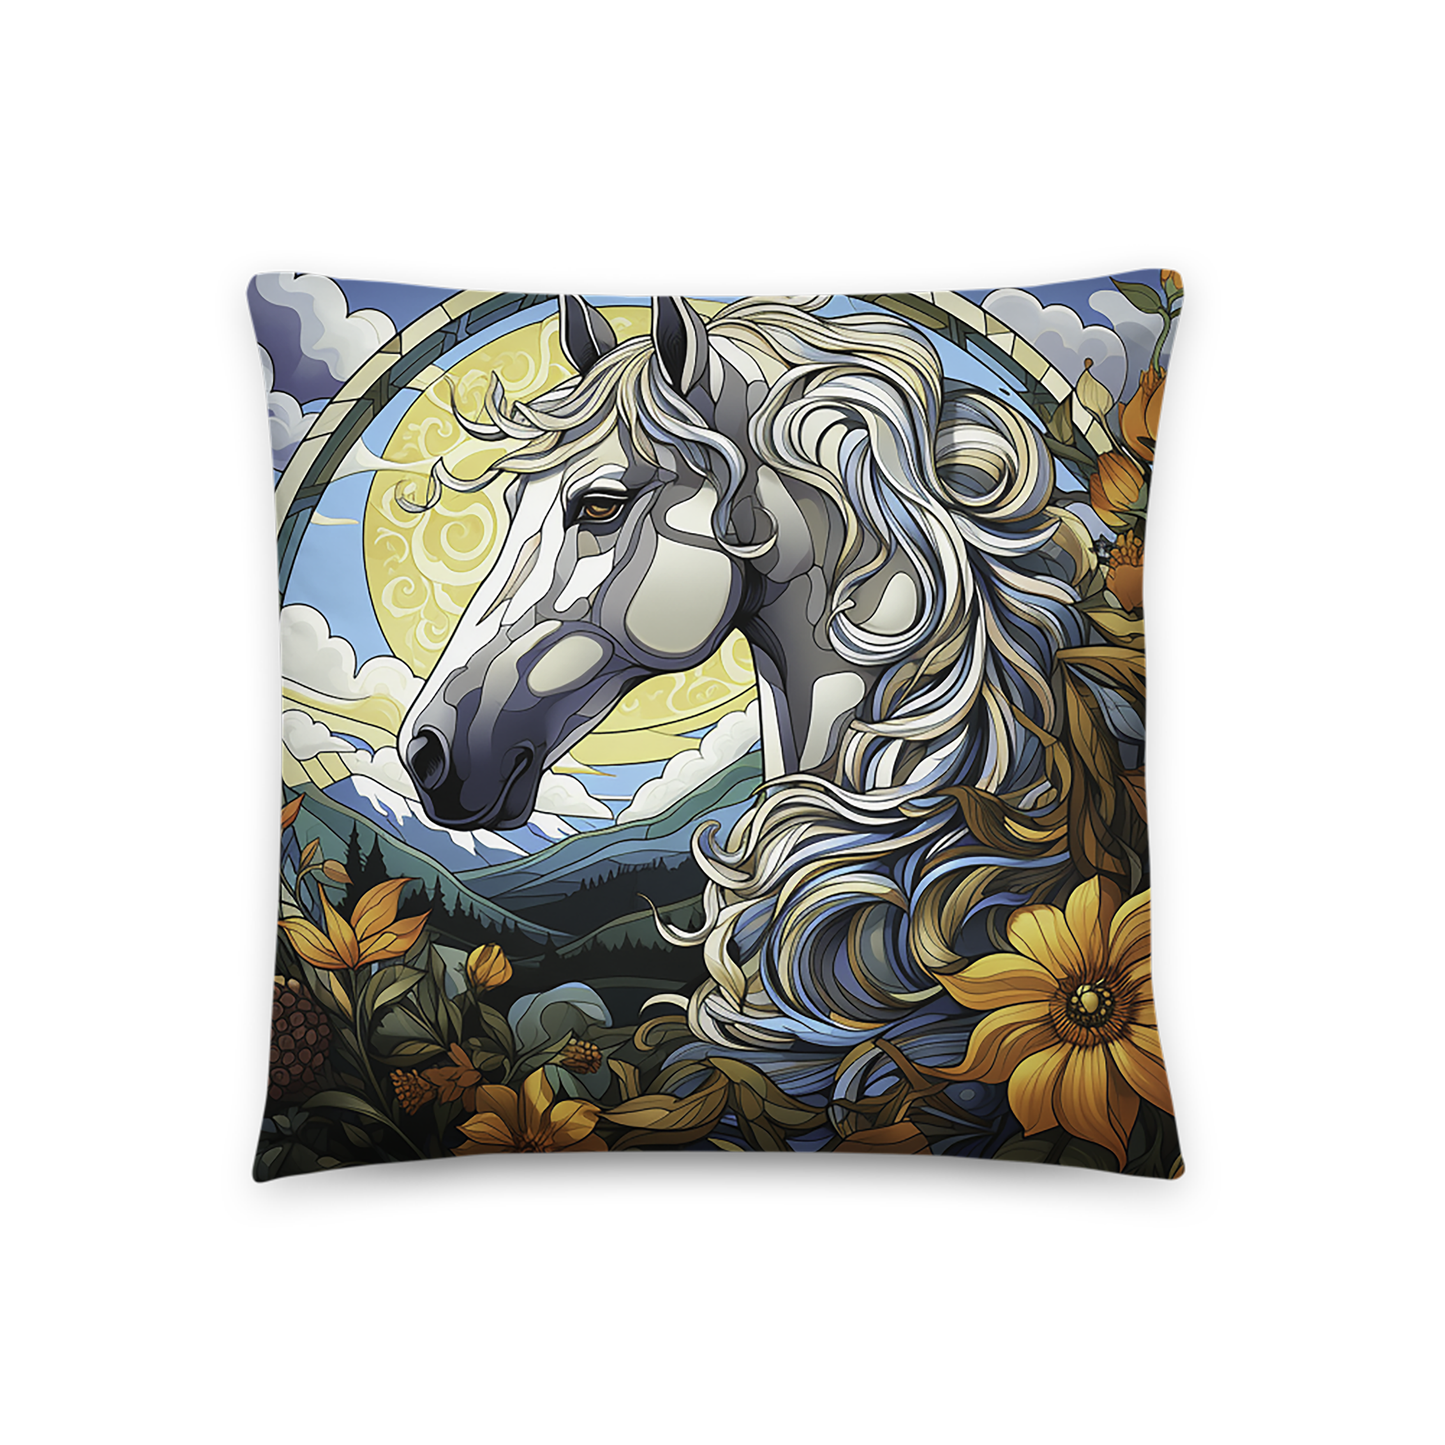 Horse Throw Pillow Art Nouveau Horse and Floral Polyester Decorative Cushion 18x18